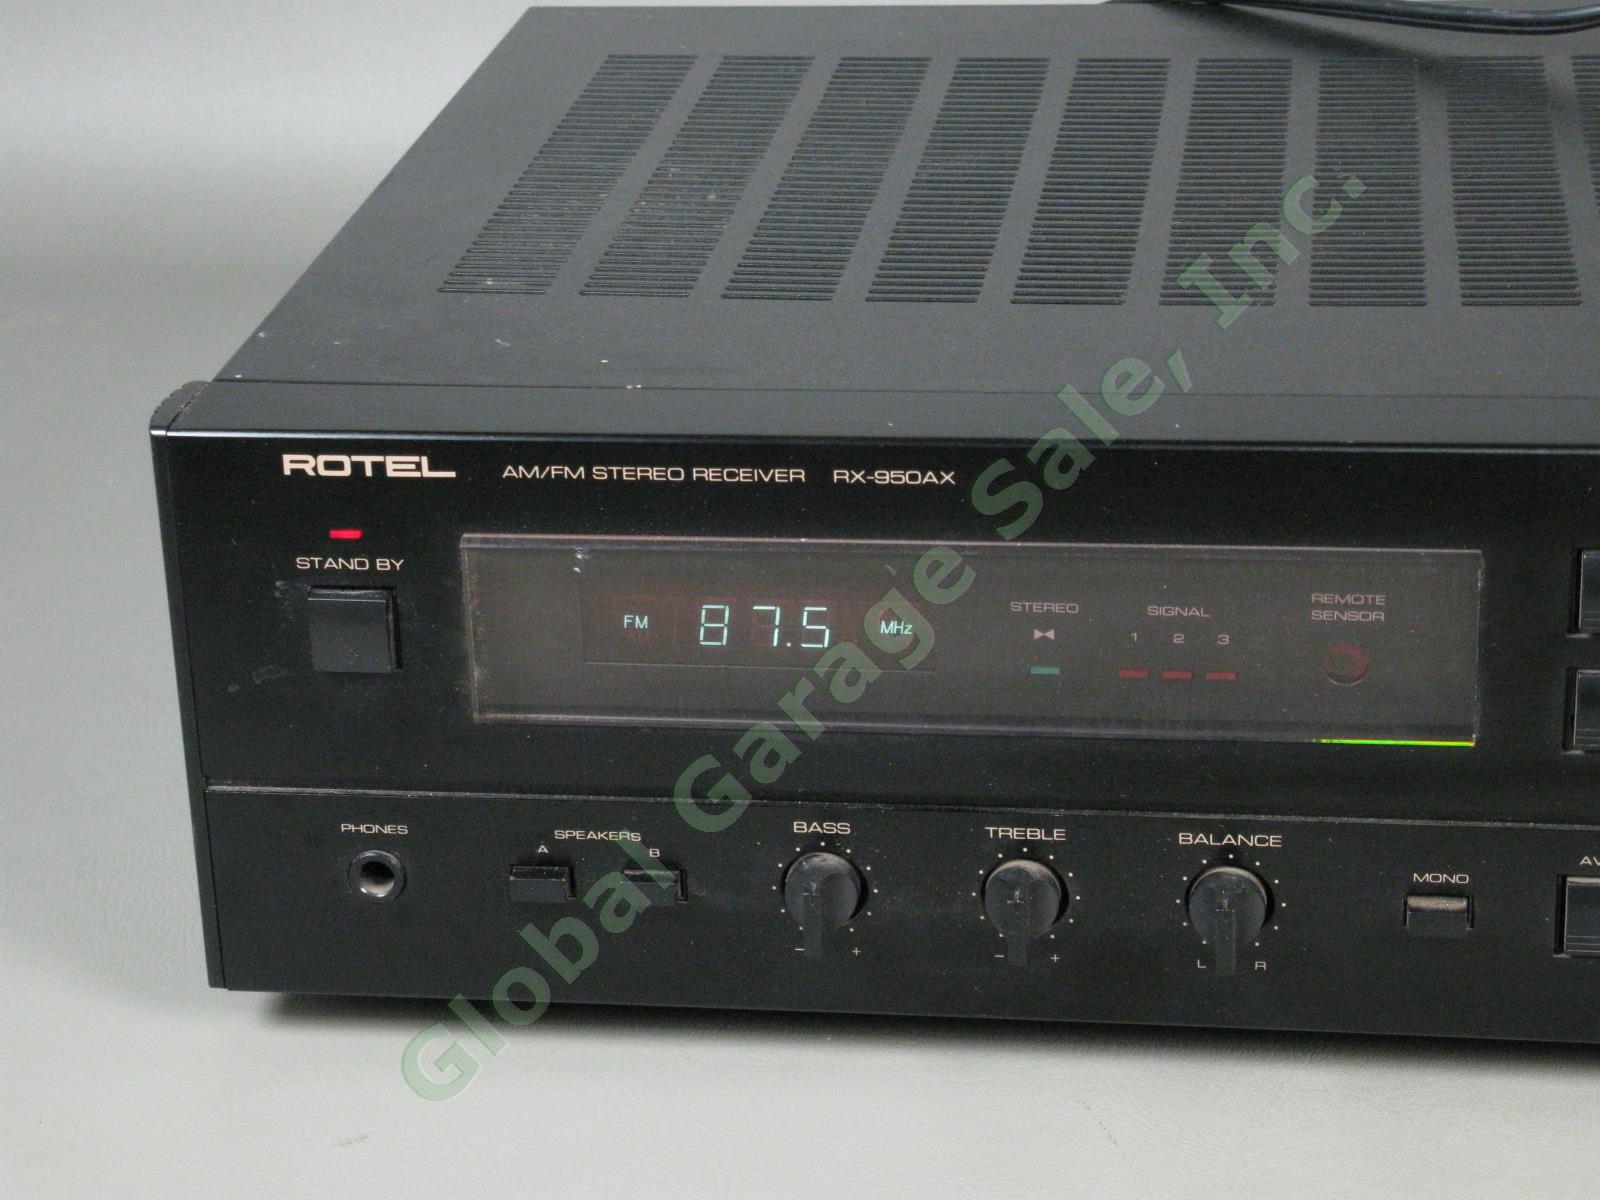 Rotel RX-950AX MkII AM/FM Stereo Receiver Remote Control Manual Bundle Works! 3